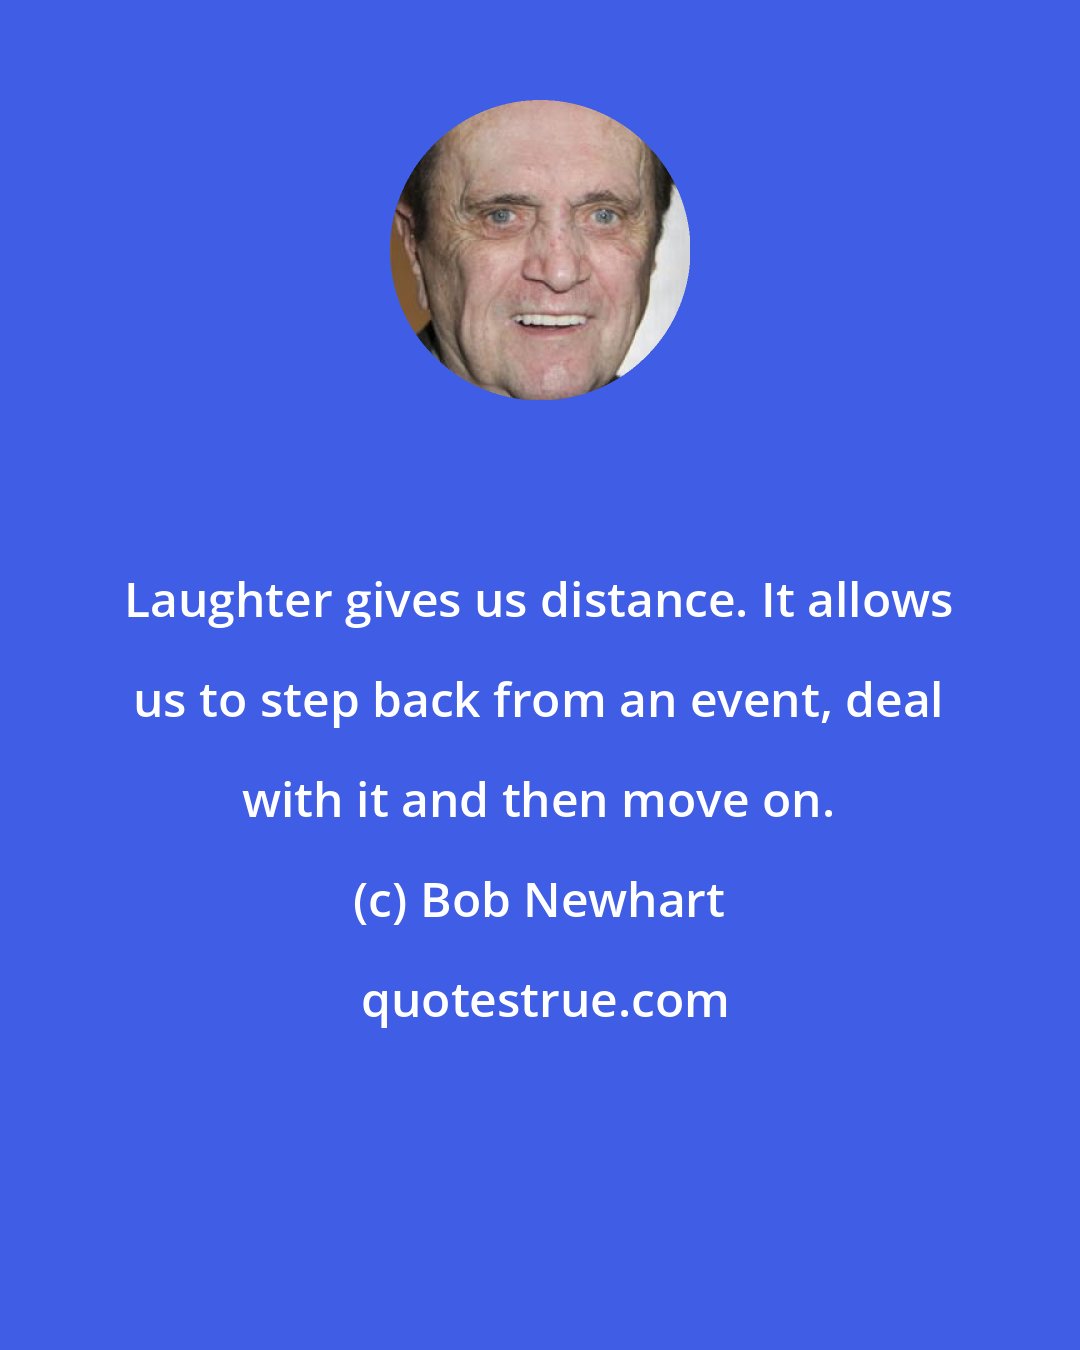 Bob Newhart: Laughter gives us distance. It allows us to step back from an event, deal with it and then move on.